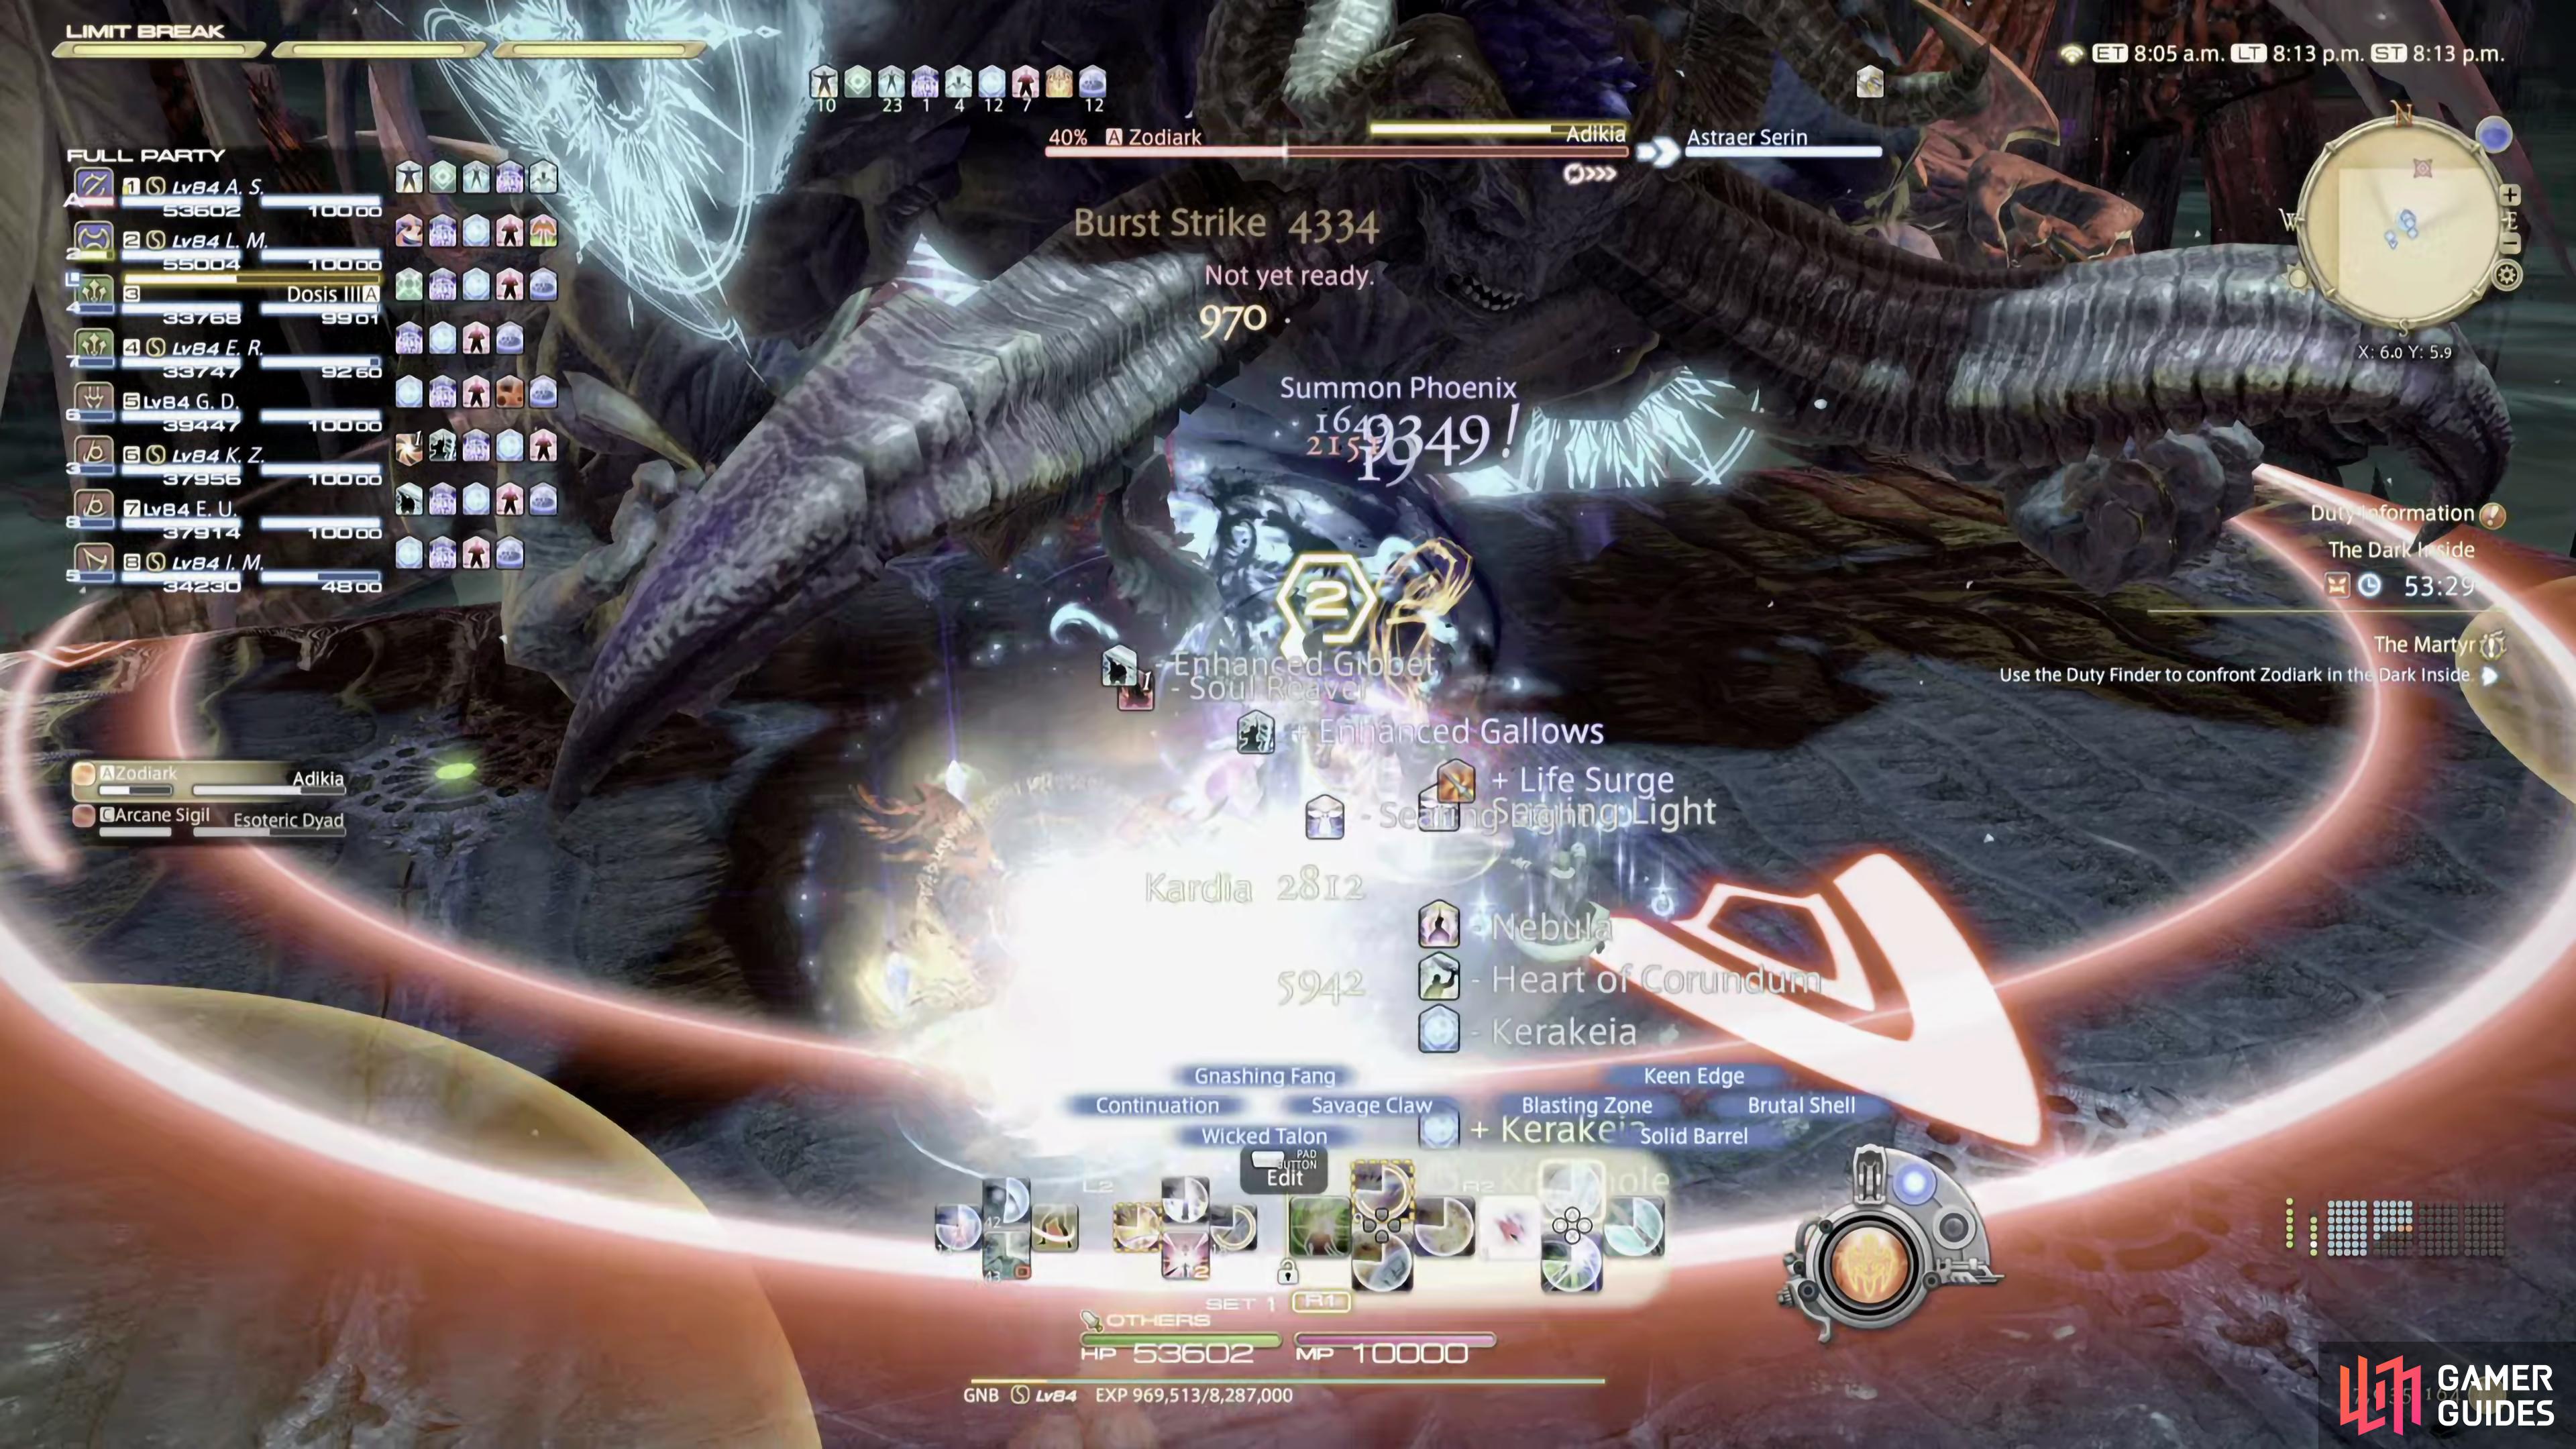 When Zodiark casts Adikia, it'll slam its fists at the middle sides of the arena